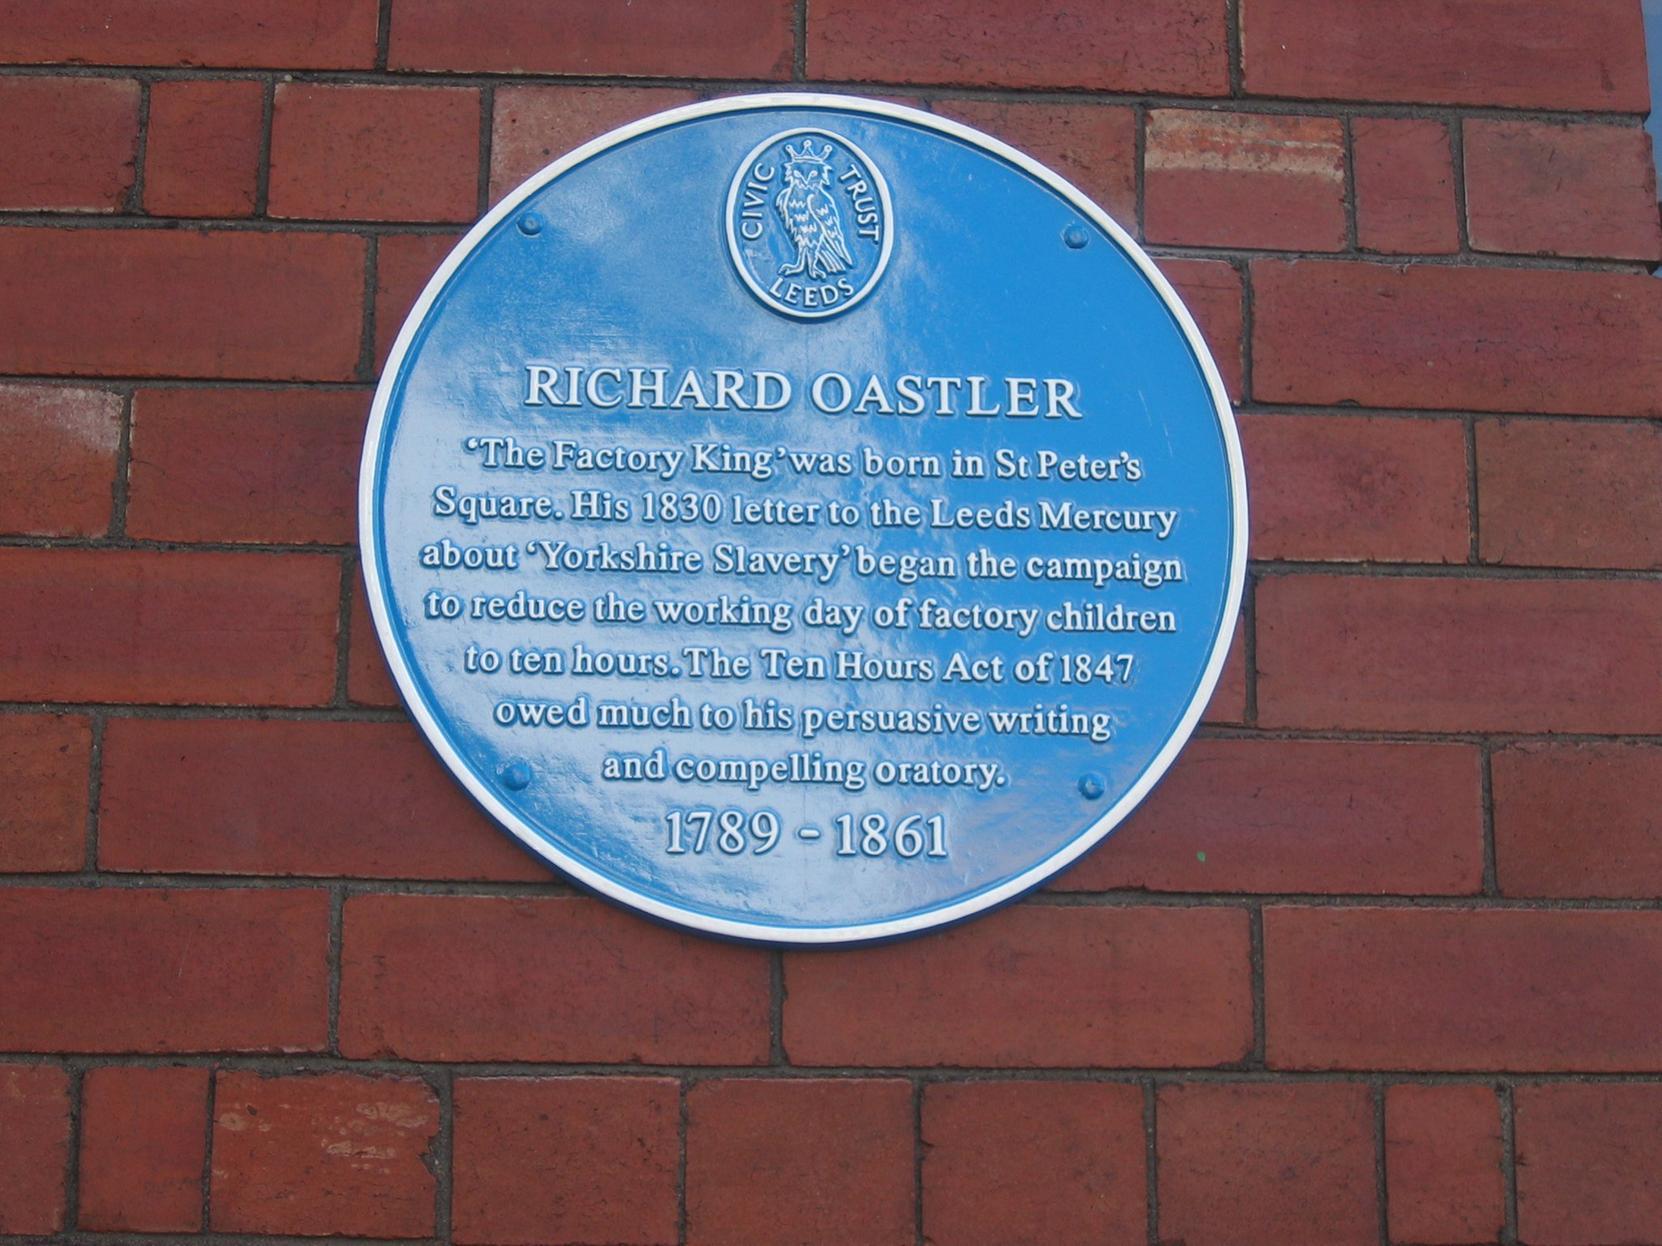 Hidden away in the grounds of St Stephens Church in Kirkstall lies the grave of one of its most famous sons. Richard Oastler was most famous for his campaigning for civil rights.